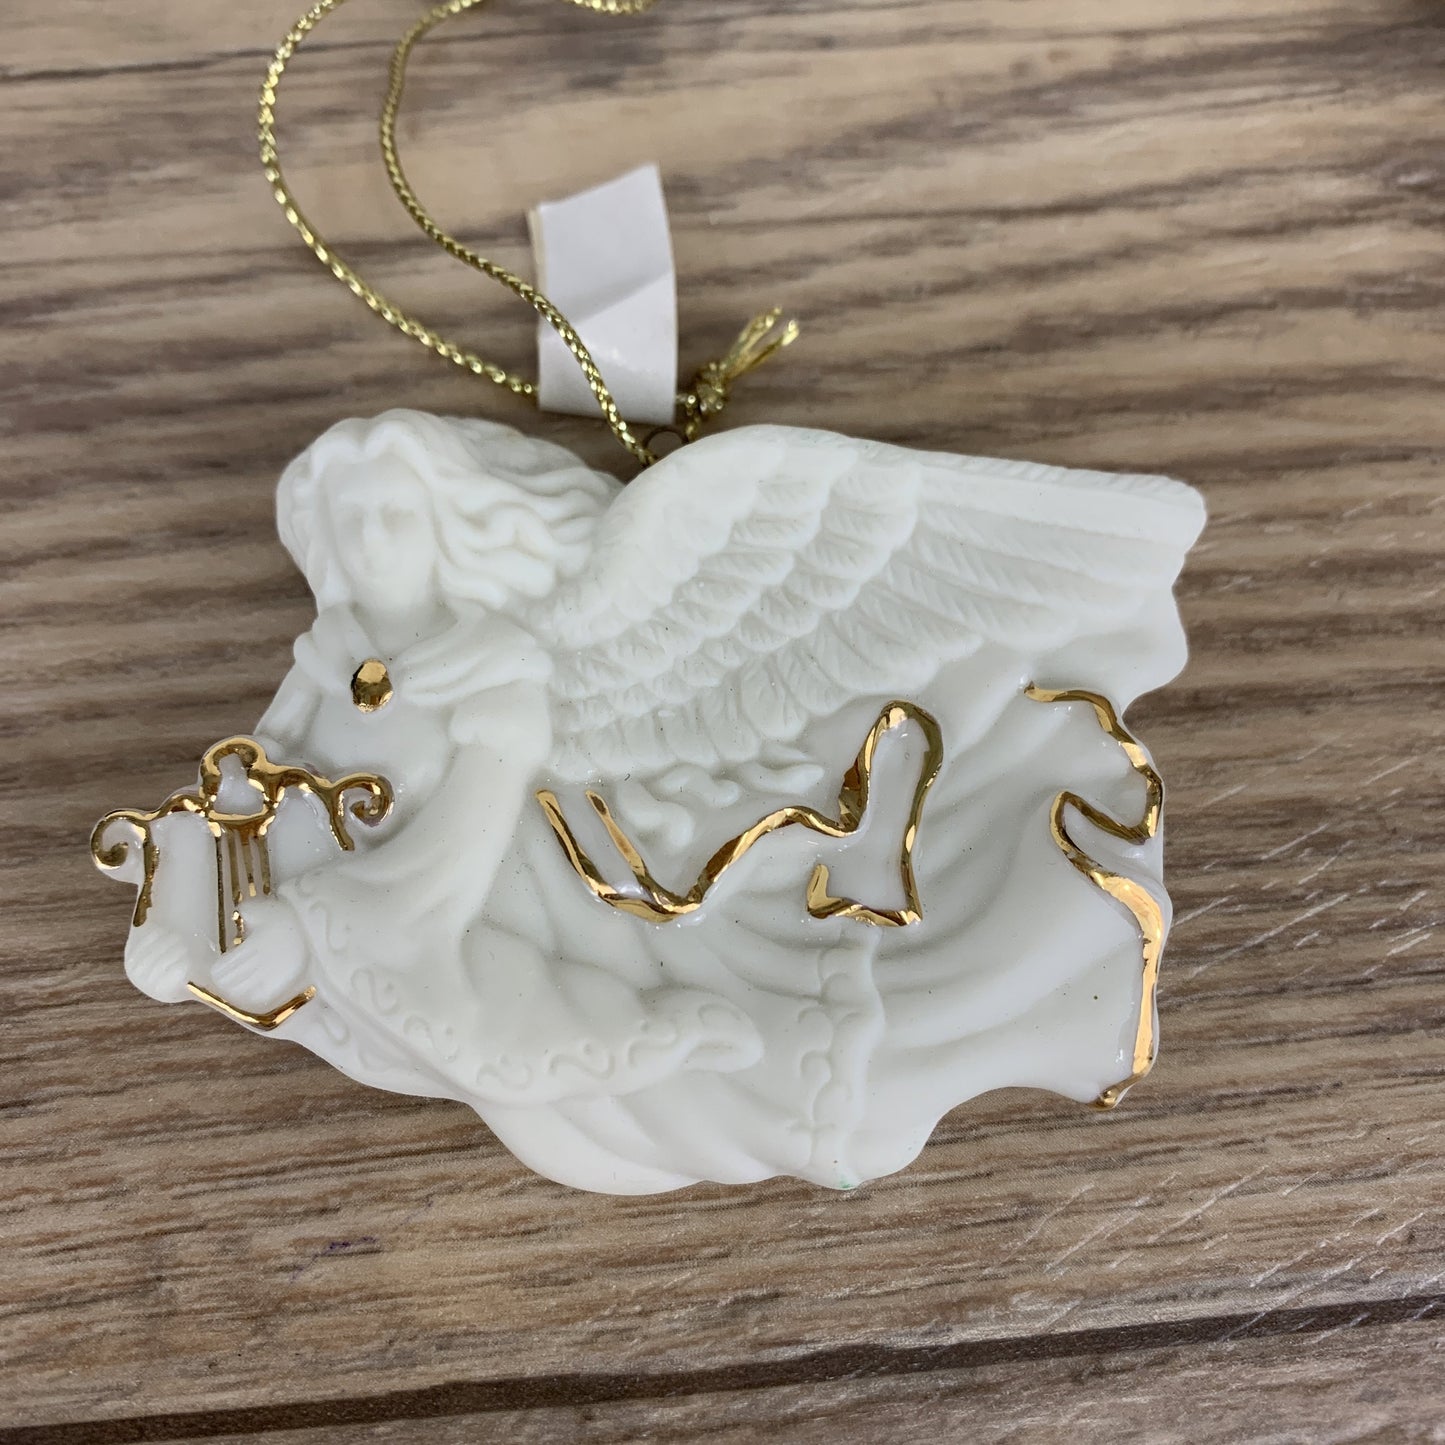 Avon Set of 3 Bisque Ornaments, Boxed Set Wreath, Angel, Sleigh White Porcelain with Gold Trim